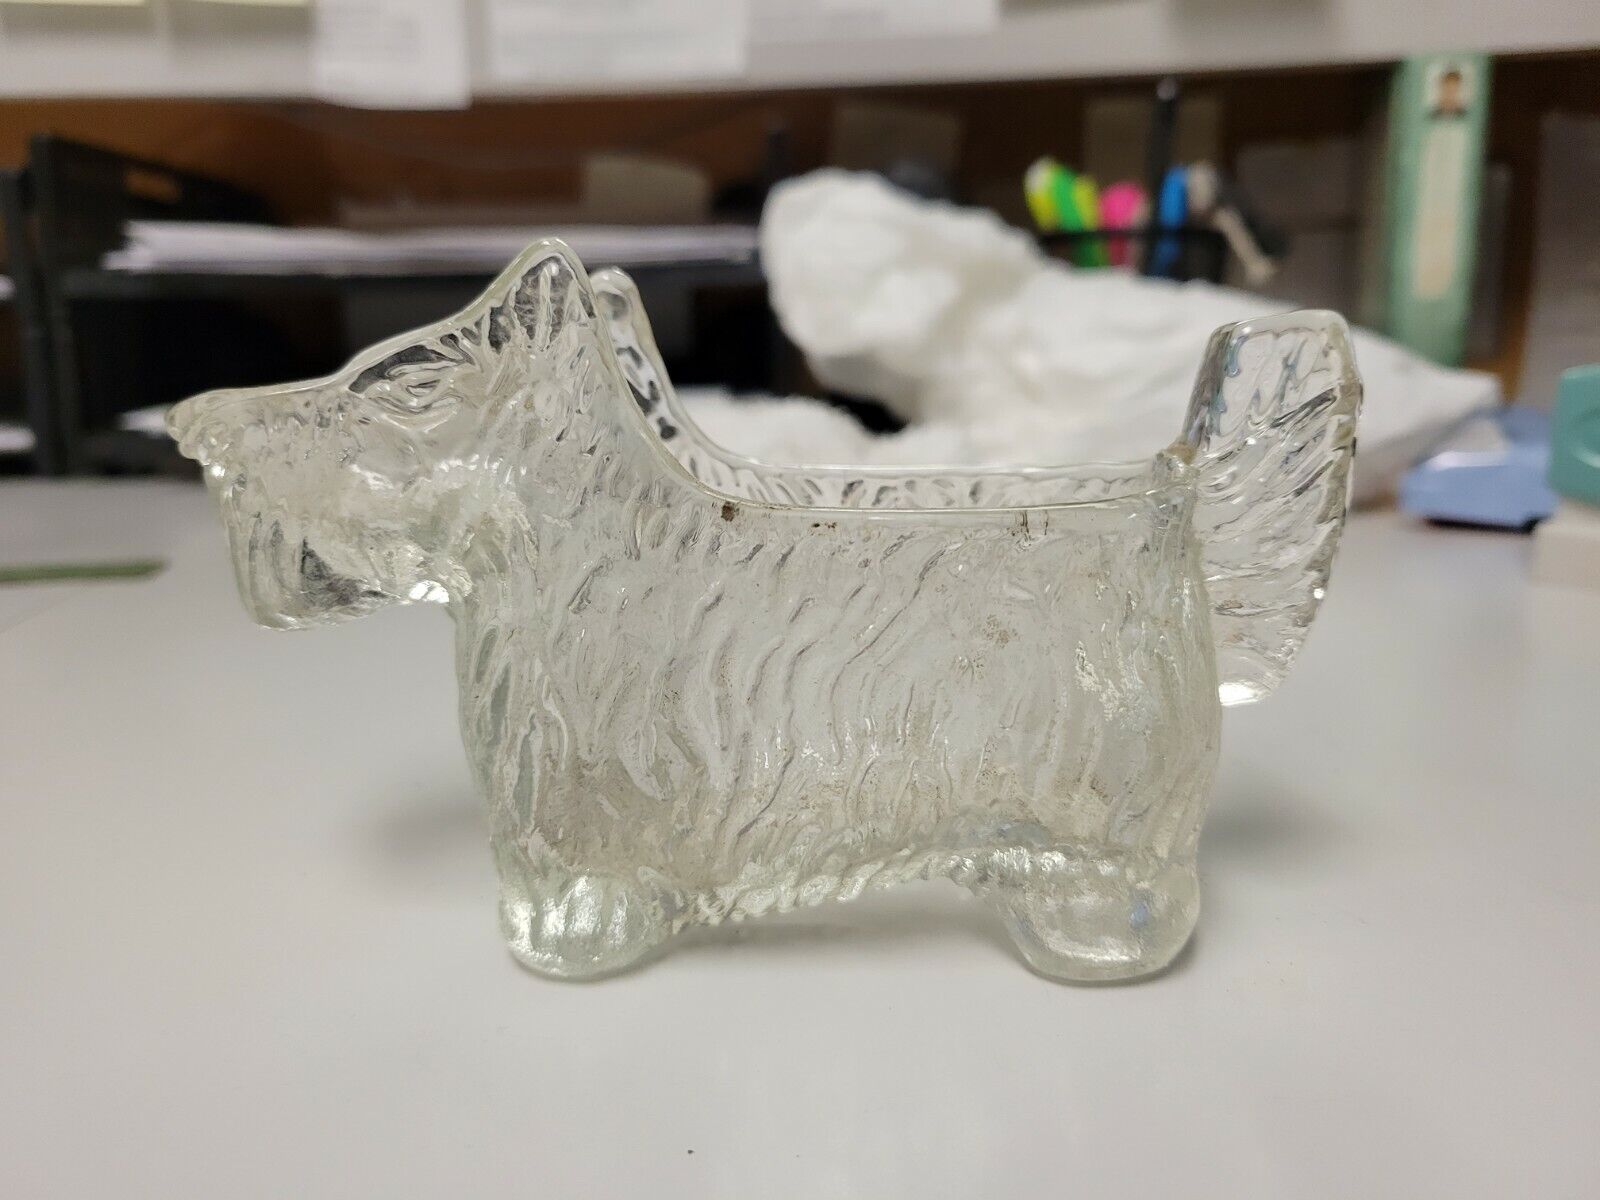 VINTAGE 1930S SCOTTISH TERRIER OR WESTIE DOG GLASS CANDY CONTAINER-5 1/4 LONG